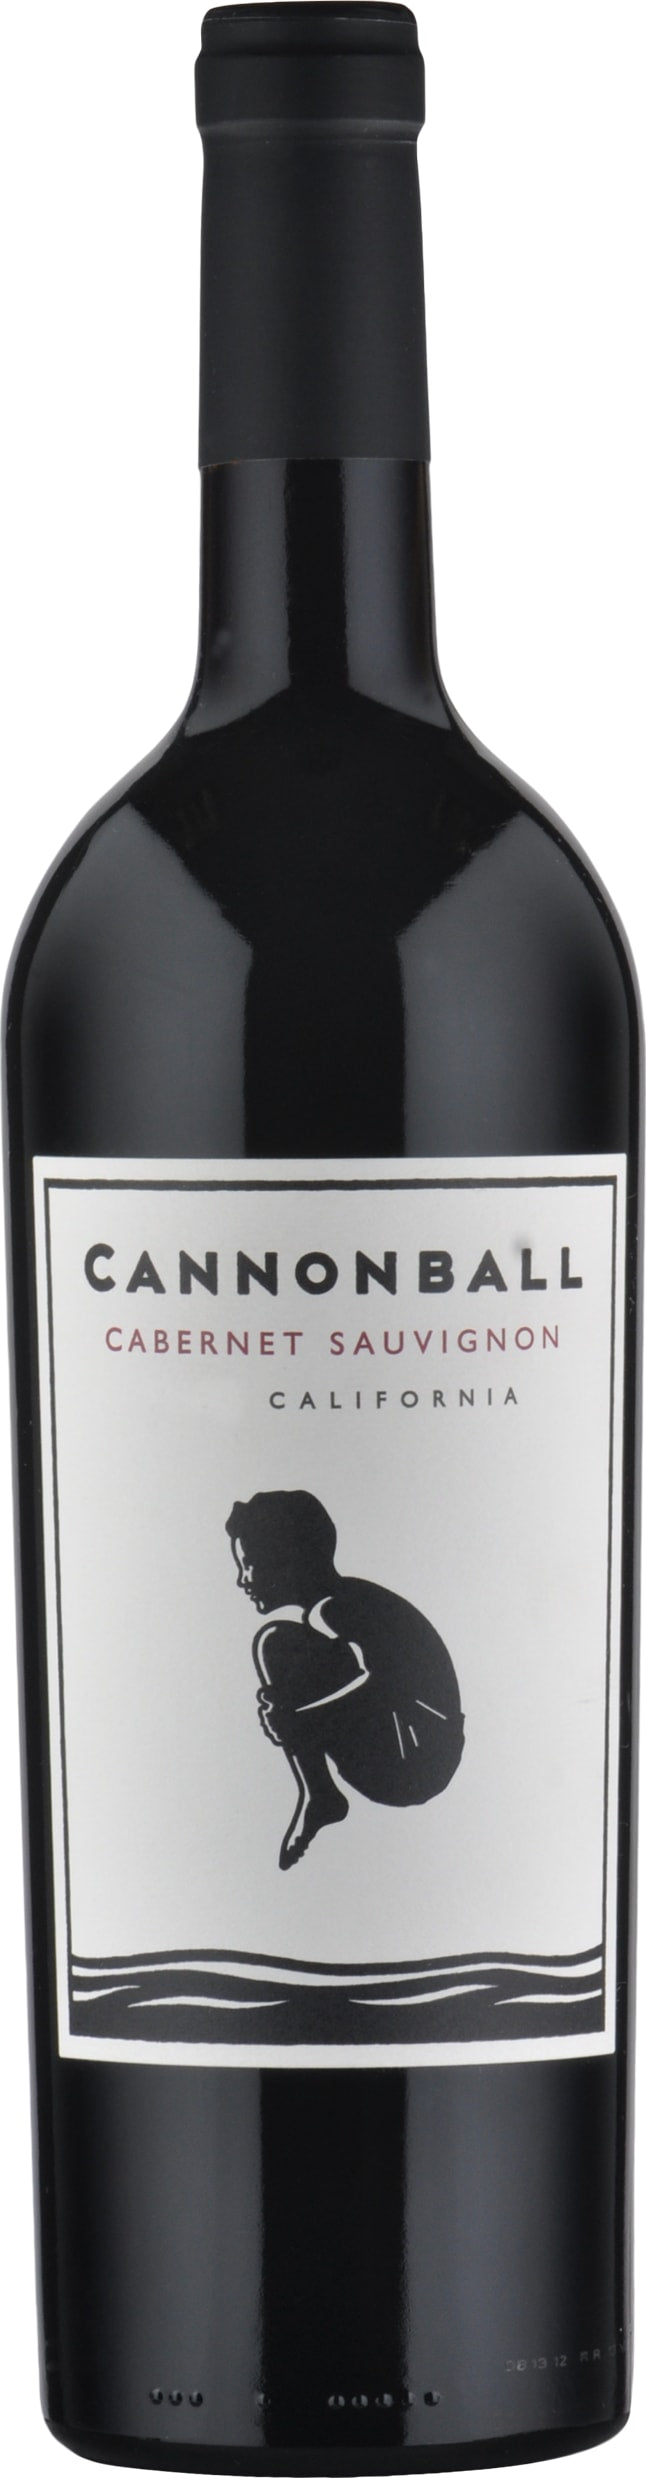 Cannonball Cabernet Sauvignon 2019 75cl - Buy Cannonball Wines from GREAT WINES DIRECT wine shop